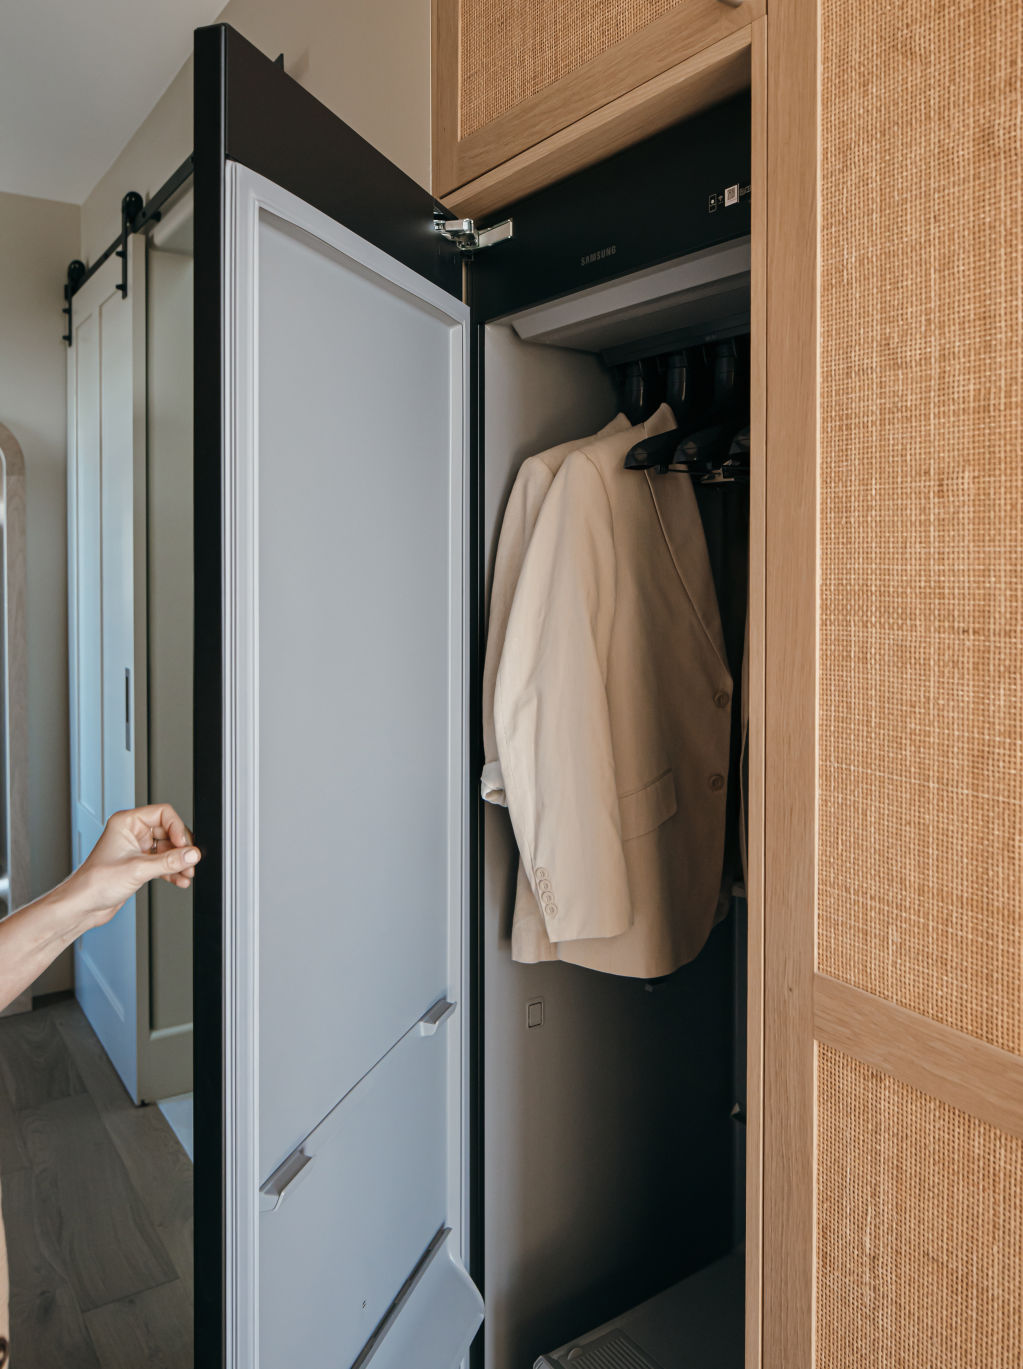 Both houses include an innovative steam-cleaning cupboard in the walk-in wardrobes. Photo: Grace Picot